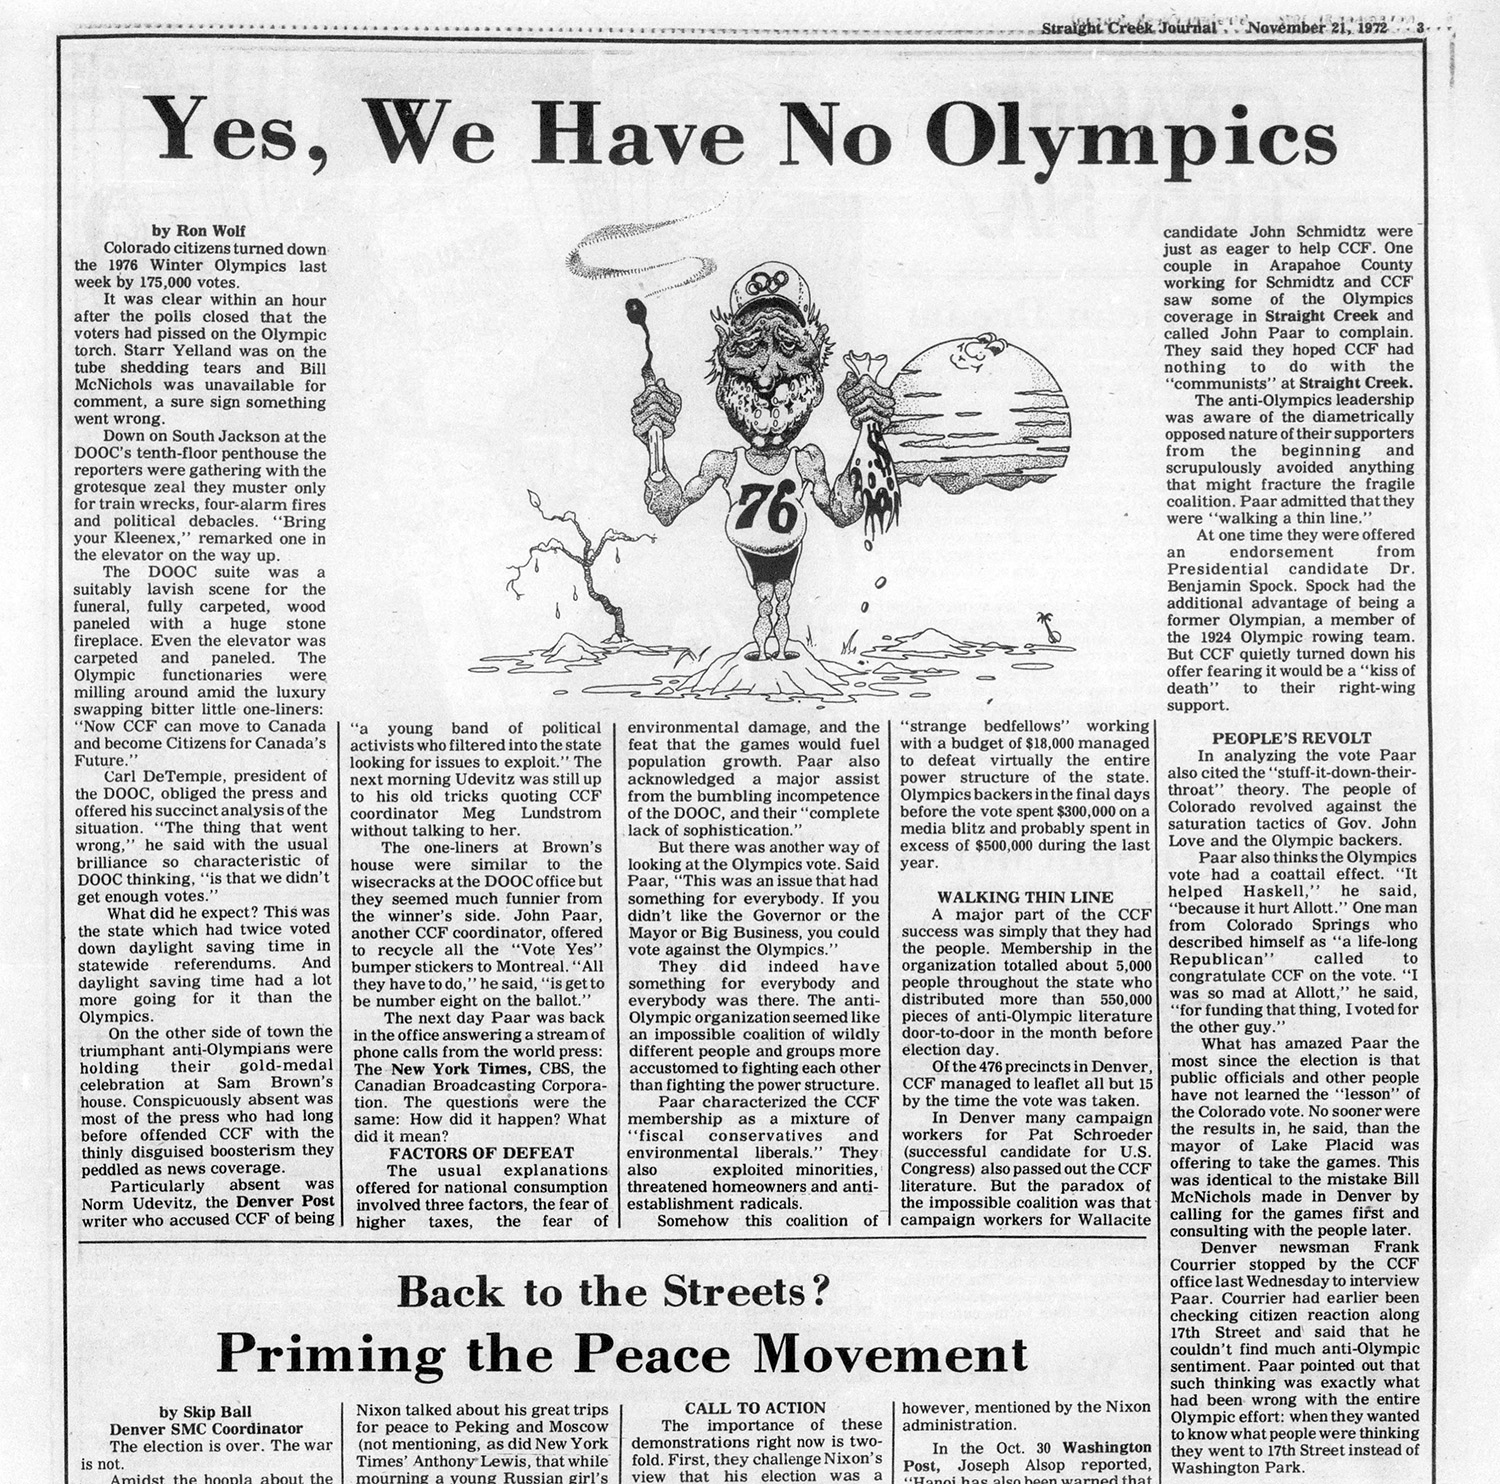 Article in the Straight Creek Journal about the failure of the Olympic vote